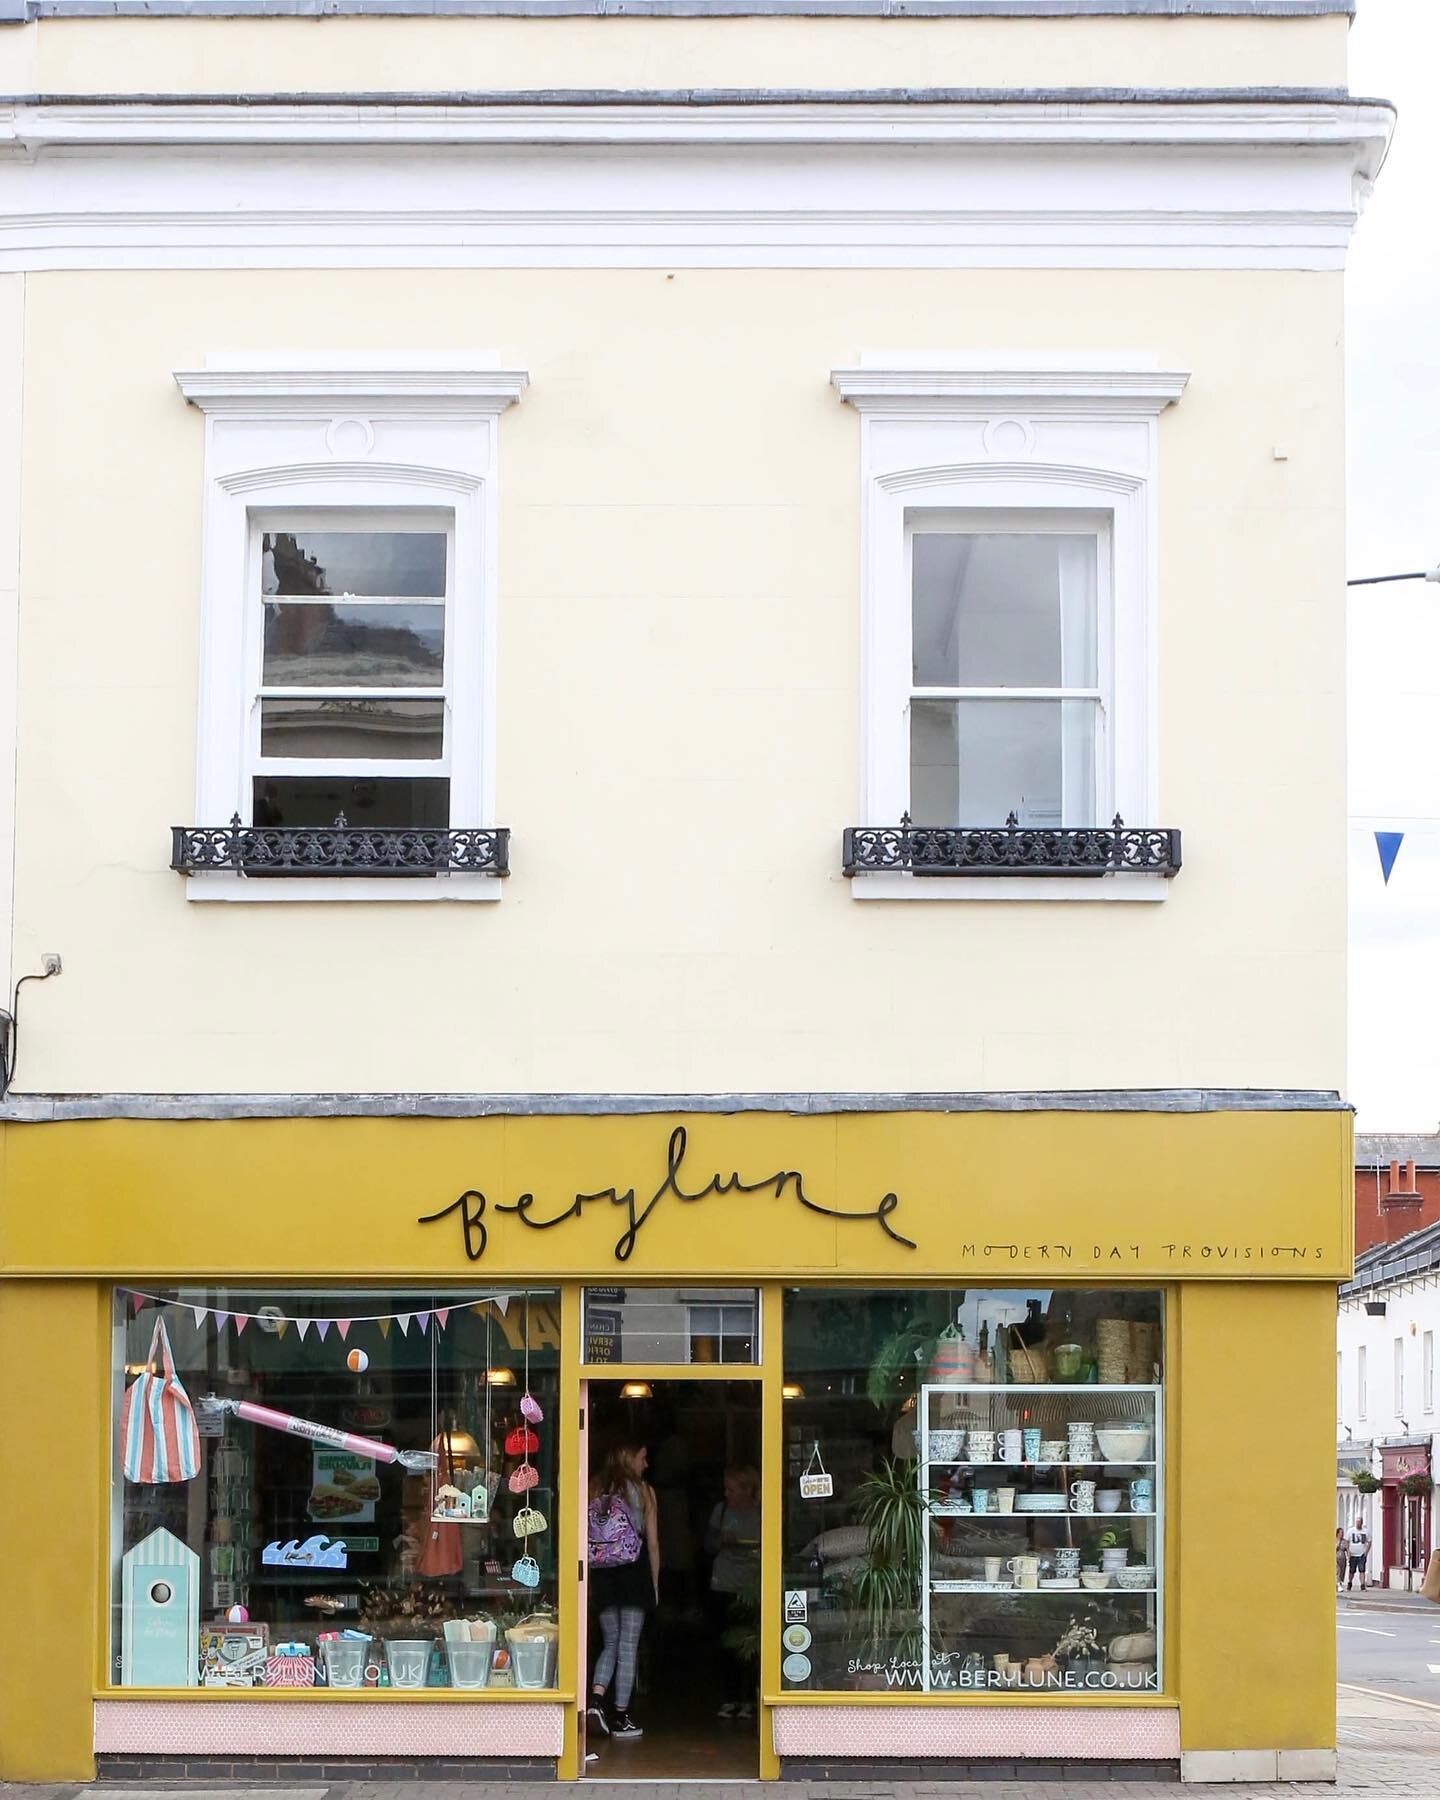 B Is for Berylune branding. One of my proudest business moments is seeing this signage on one of my favourite shops in the beautiful Leamington Spa. 

Photos by @berylune. Thank you! 

#branding #shopsignage #handdrawntype #berylune #sophiekinnsillus